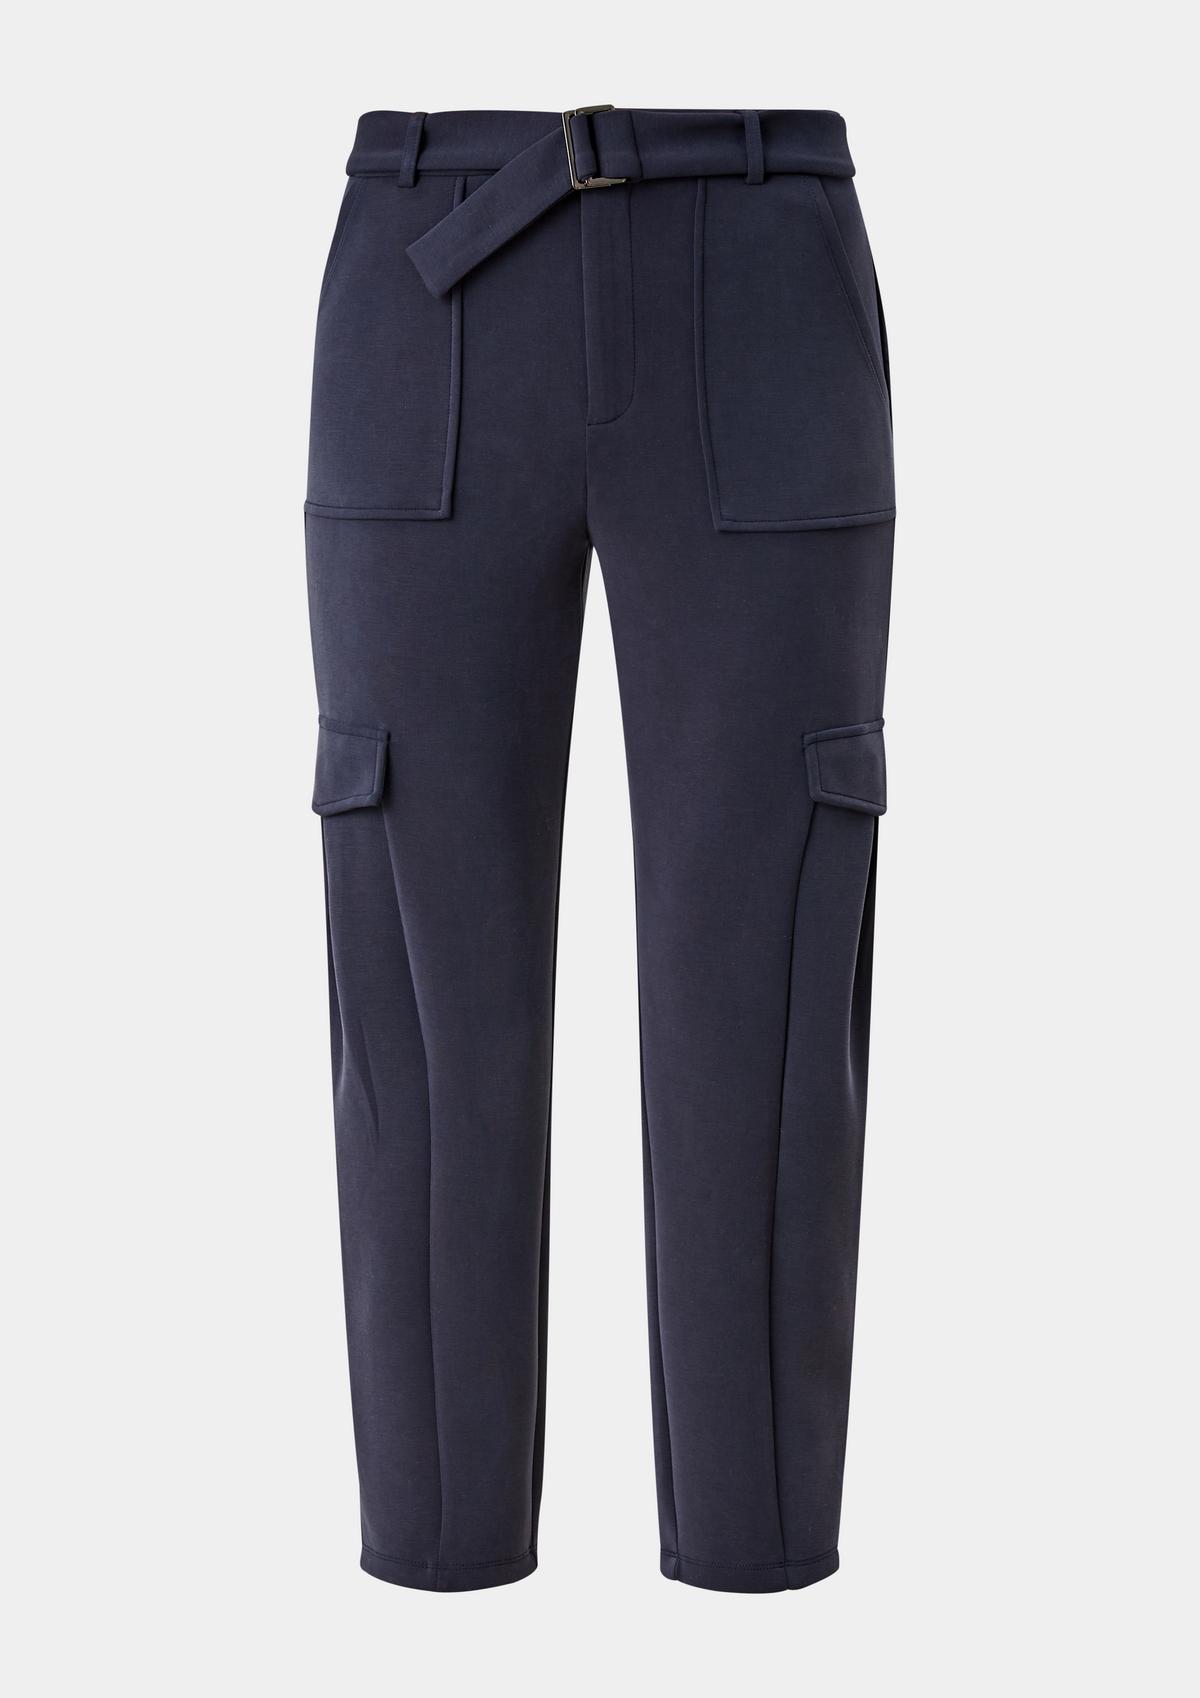 s.Oliver Scuba trousers in a cargo style